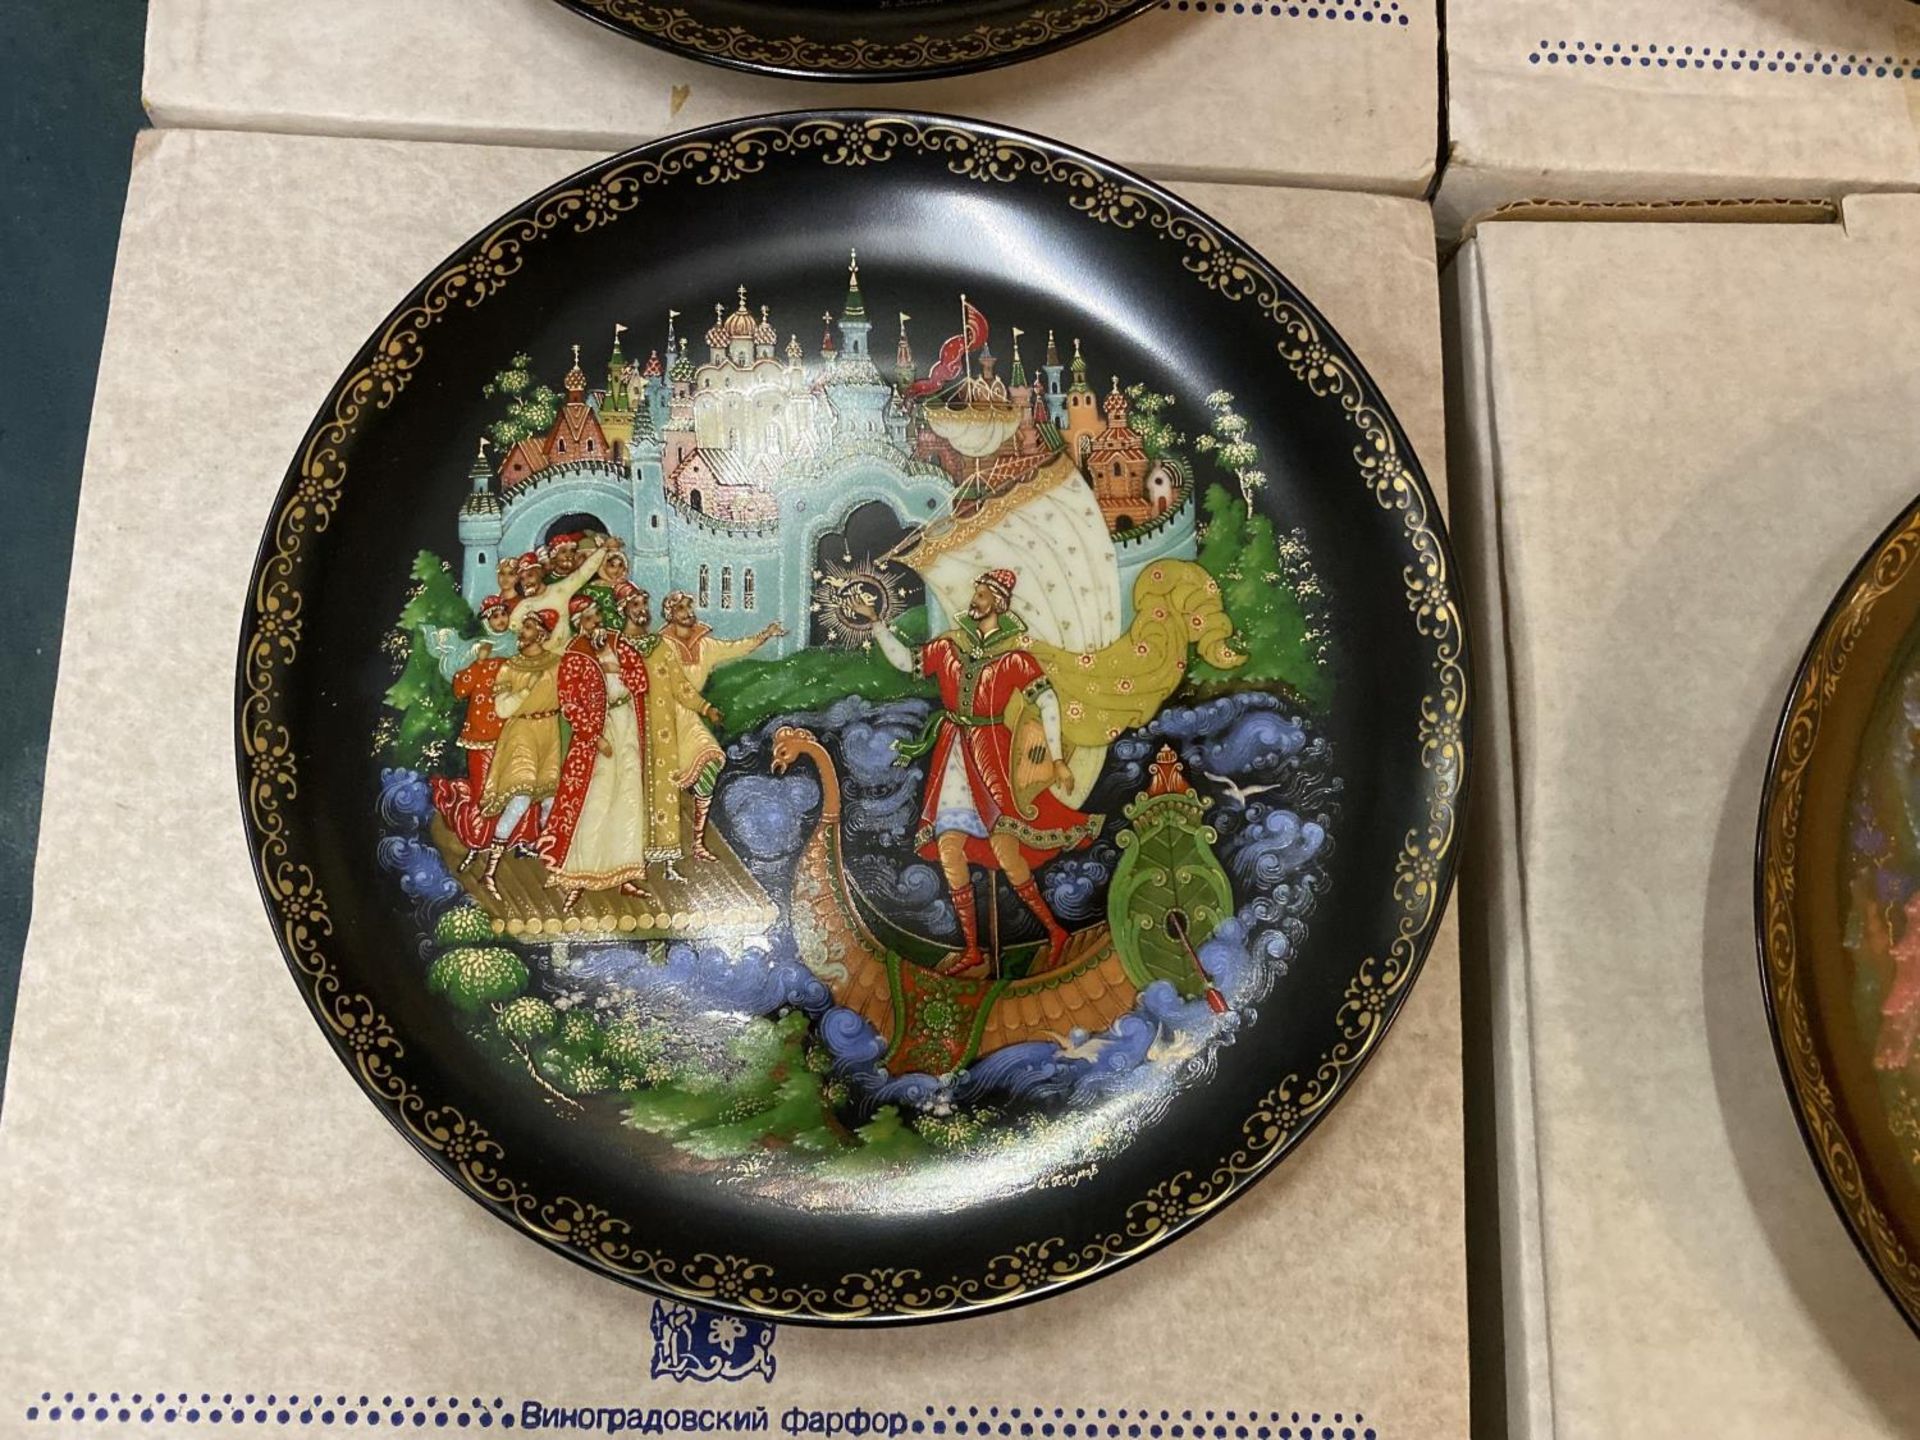 SIX BRADFORD EXCHANGE COLLECTABLE CABINET PLATES WITH RUSSIAN FAIRYTALE SCENES - Image 6 of 6